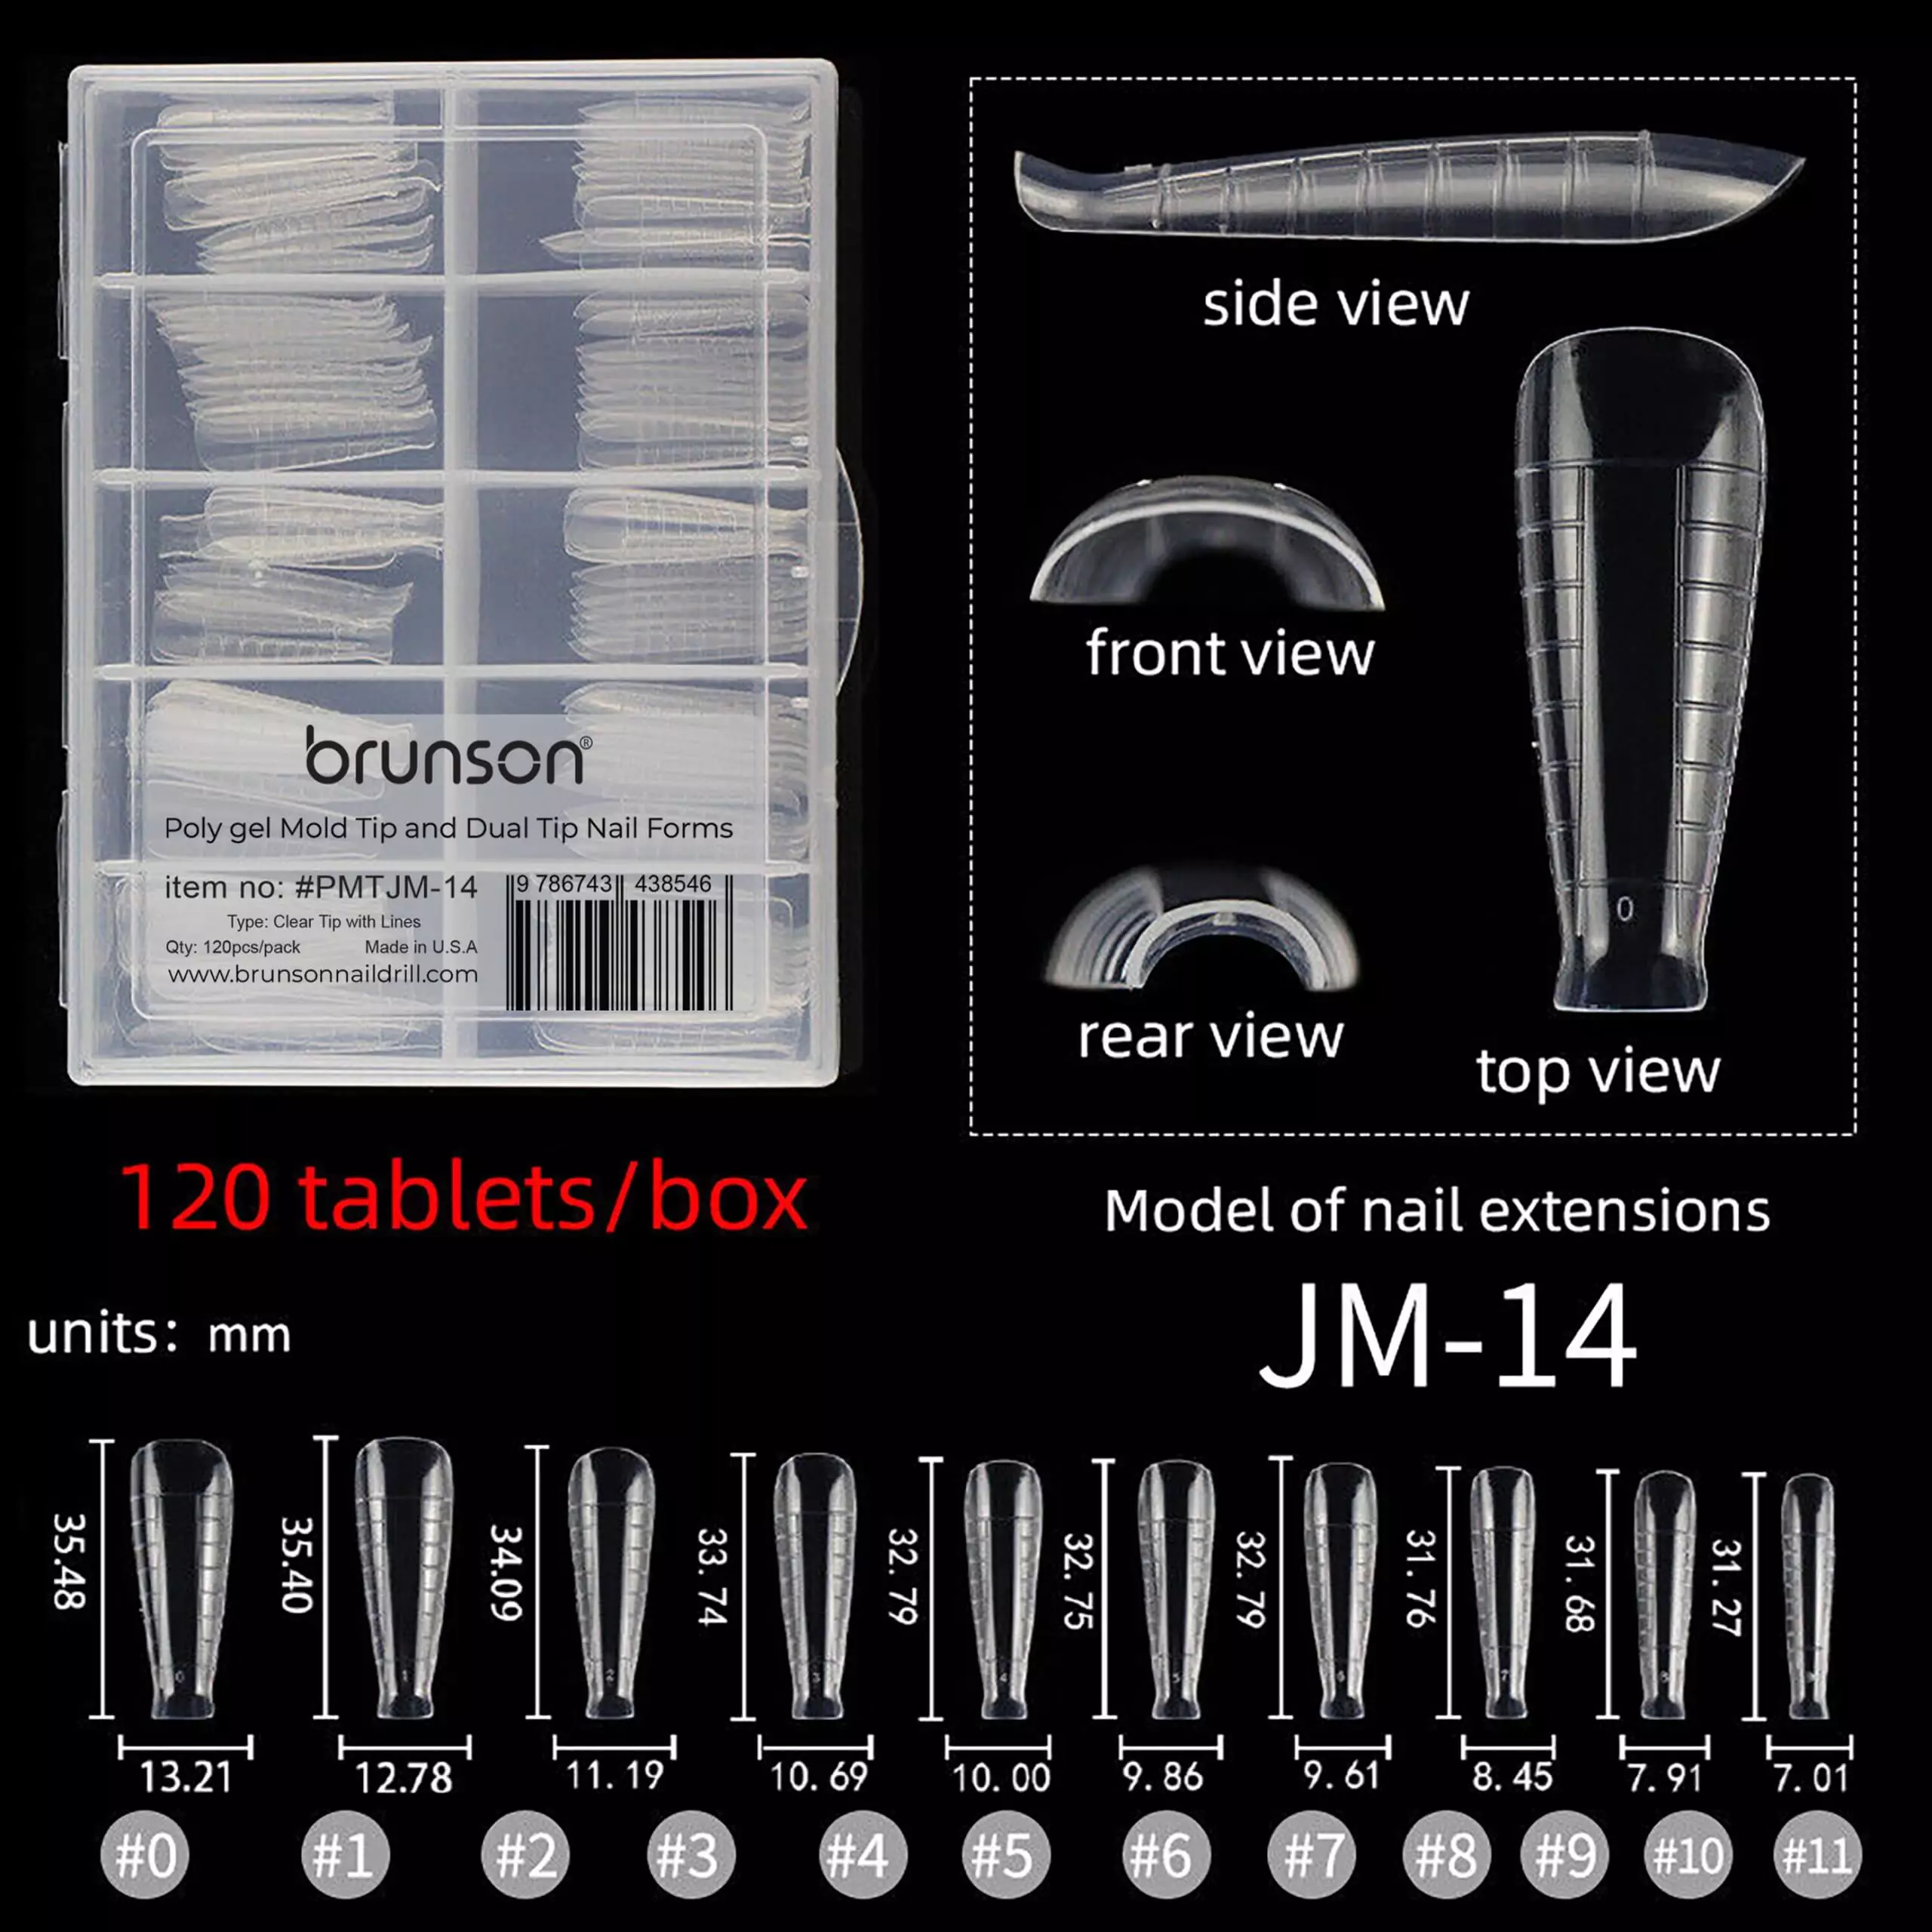 Poly-Gel-Mold-Tip-and-Dual-Tip-Nail-Forms-PMTJM-14-Brunson-2